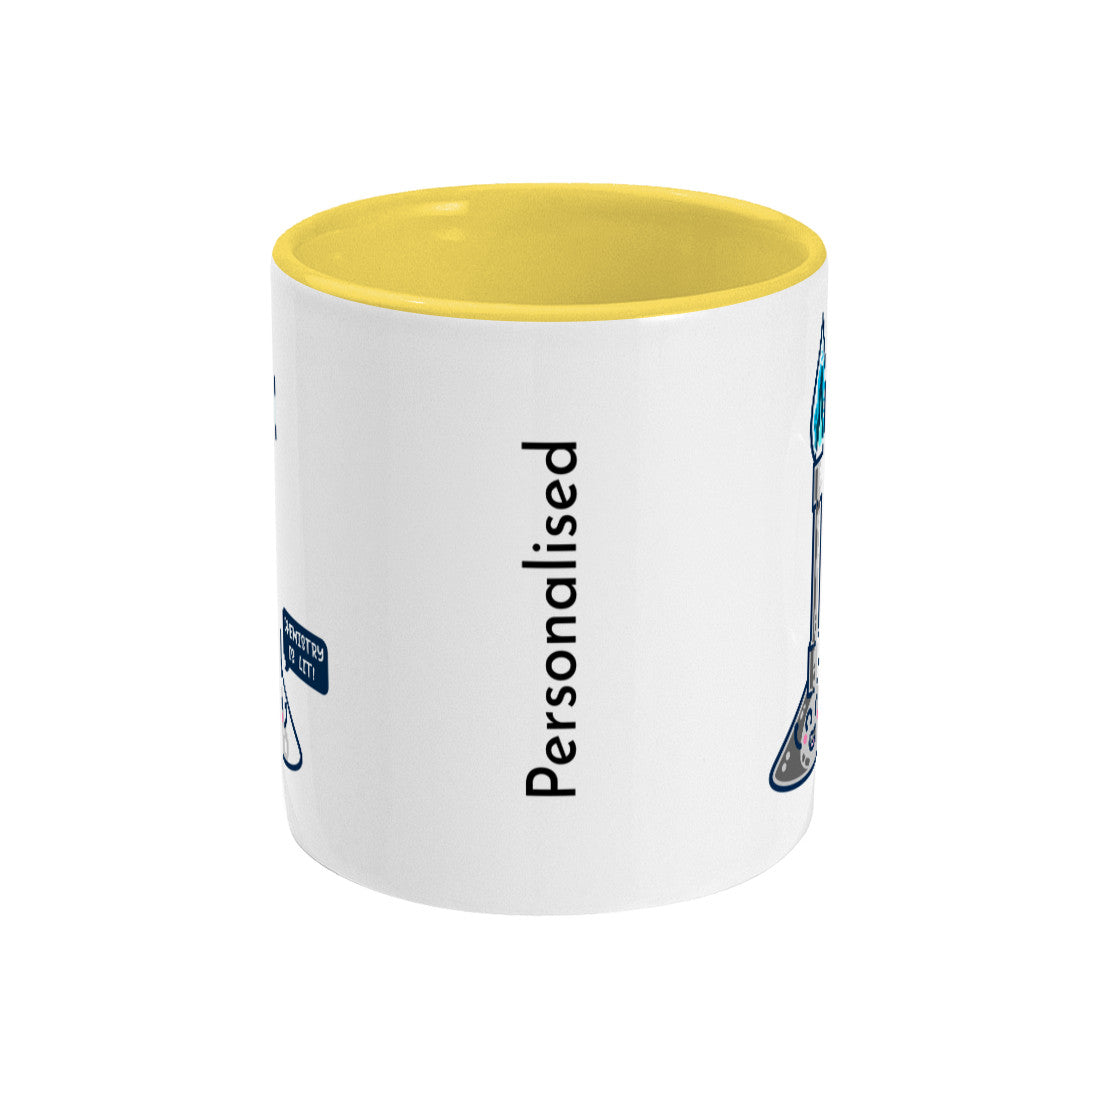 A yellow and white two toned ceramic mug showing a side view with the handle hidden around the other side and just the edges of the front and back design of a cute Bunsen burner and the word personalised vertically between them.